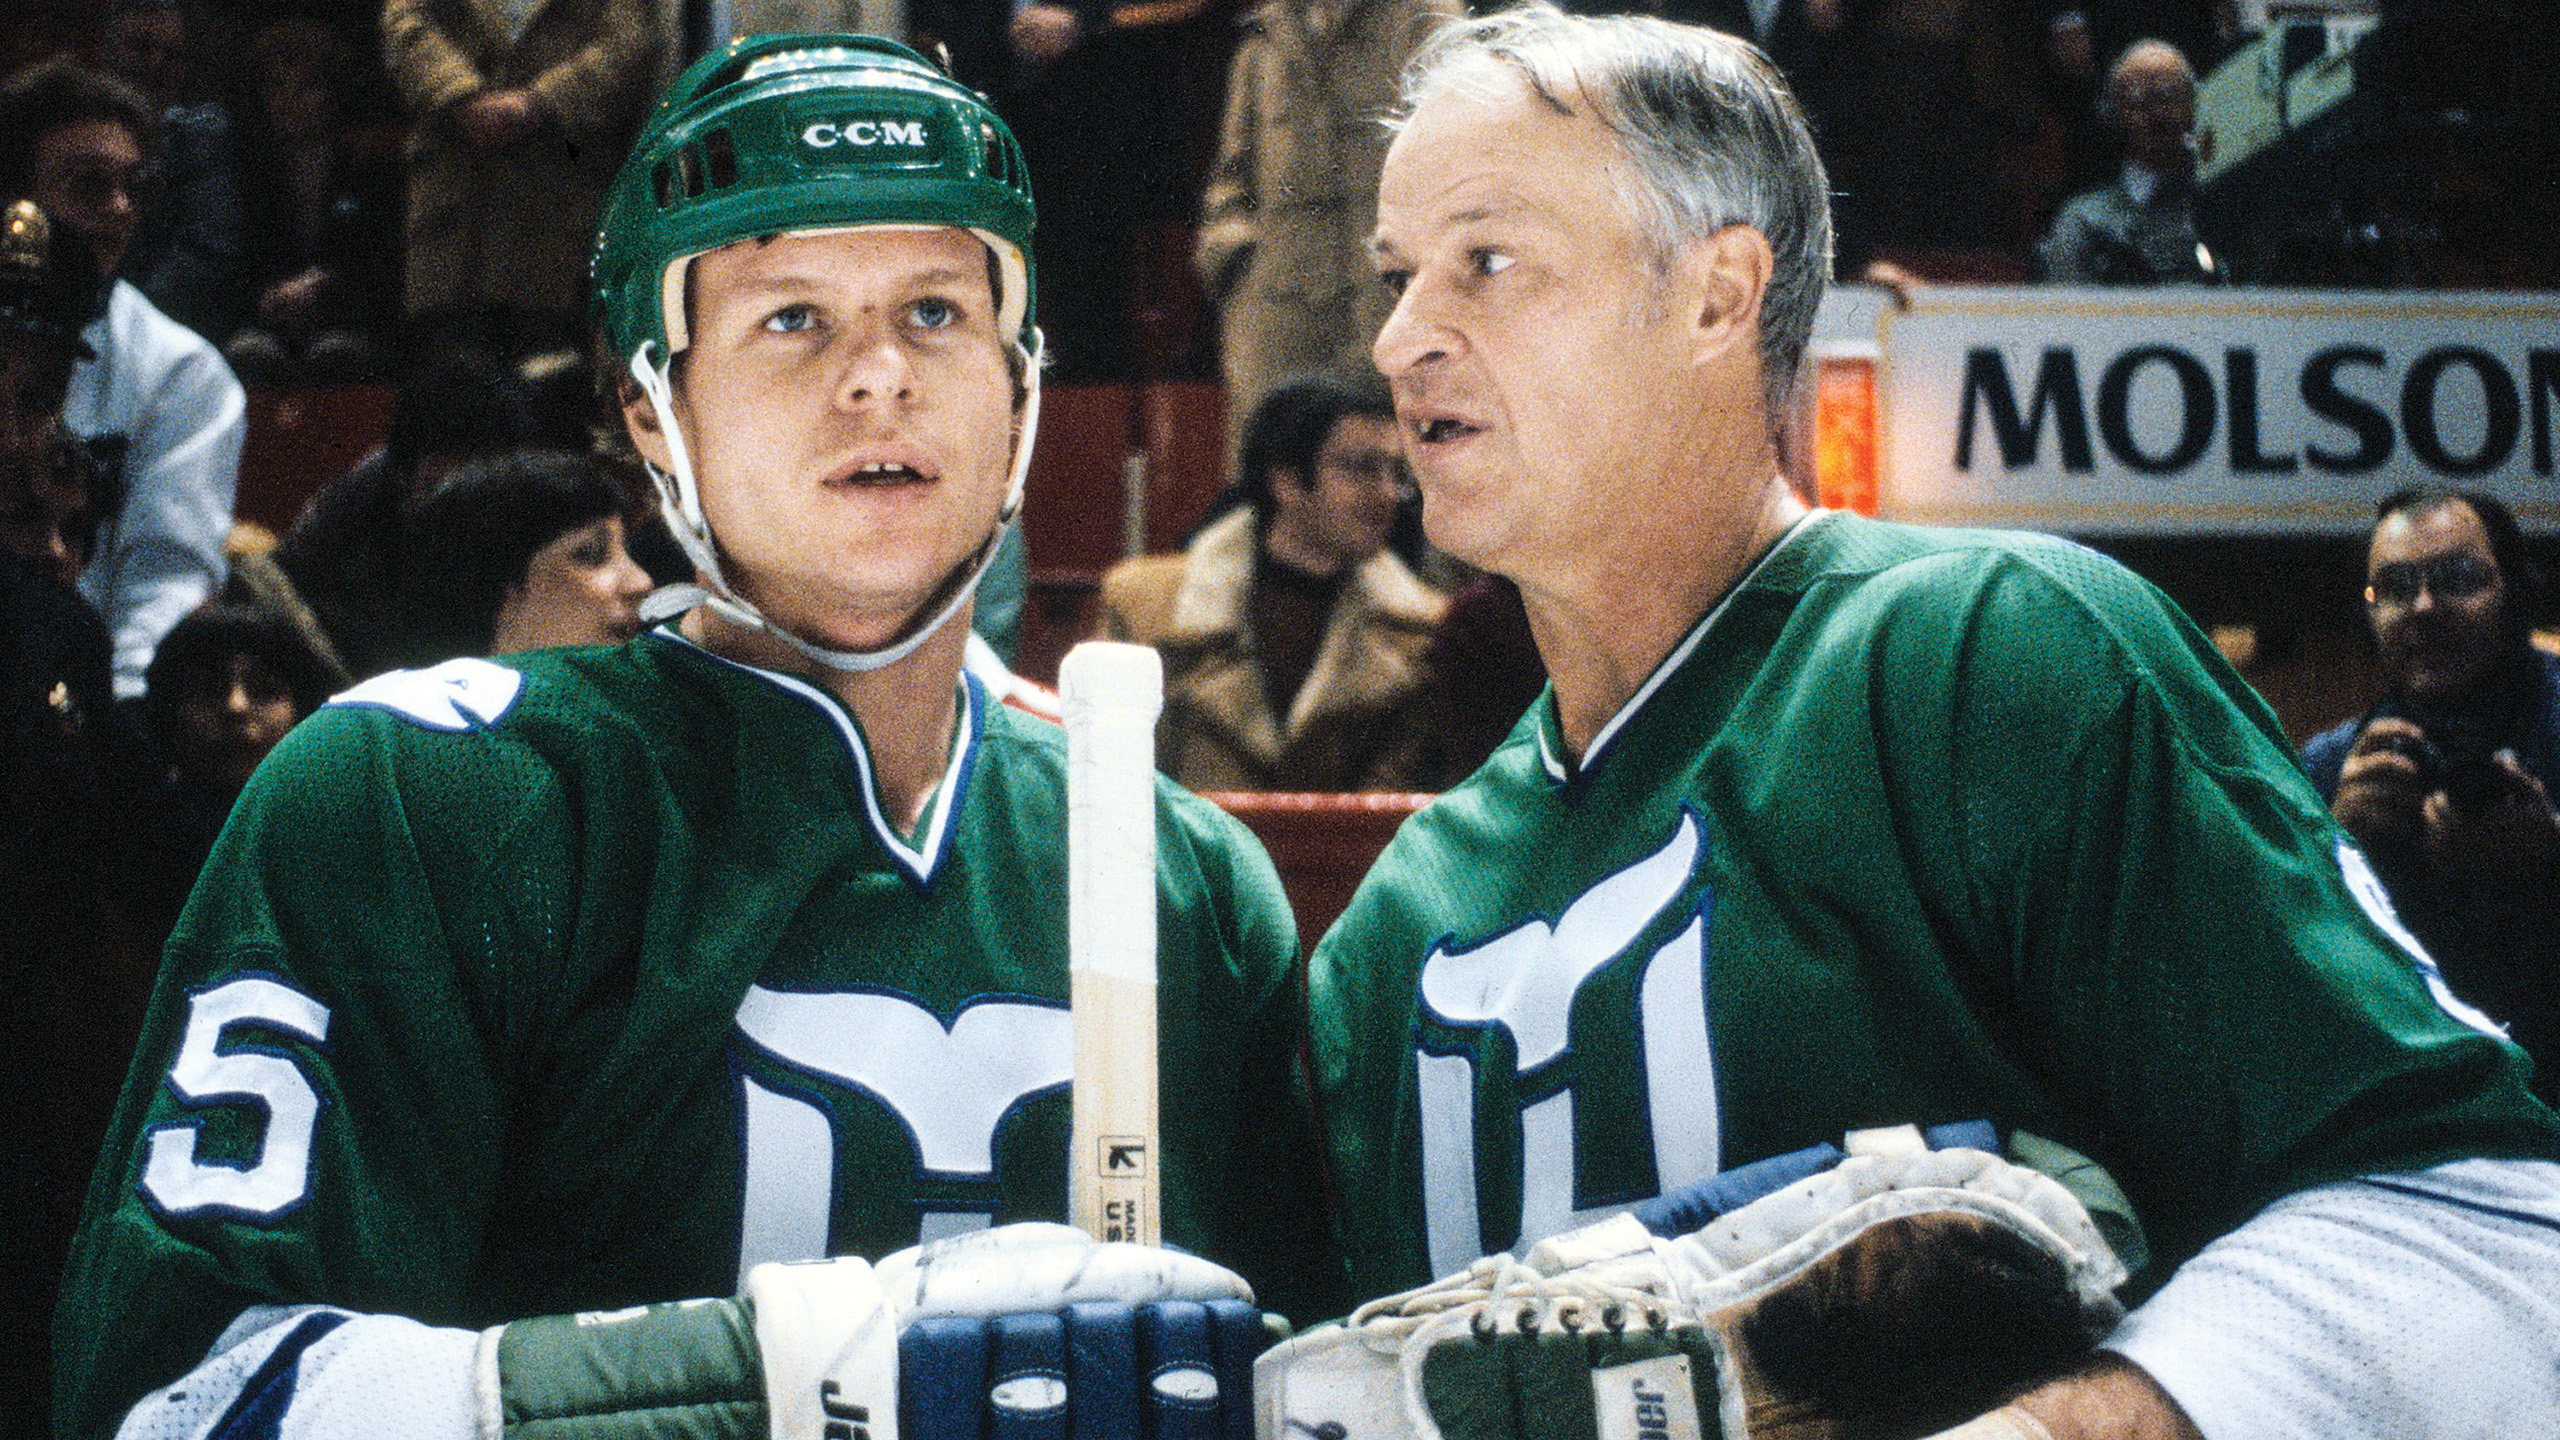 CT Hockey Fans Will Never Forget Their Beloved Hartford Whalers